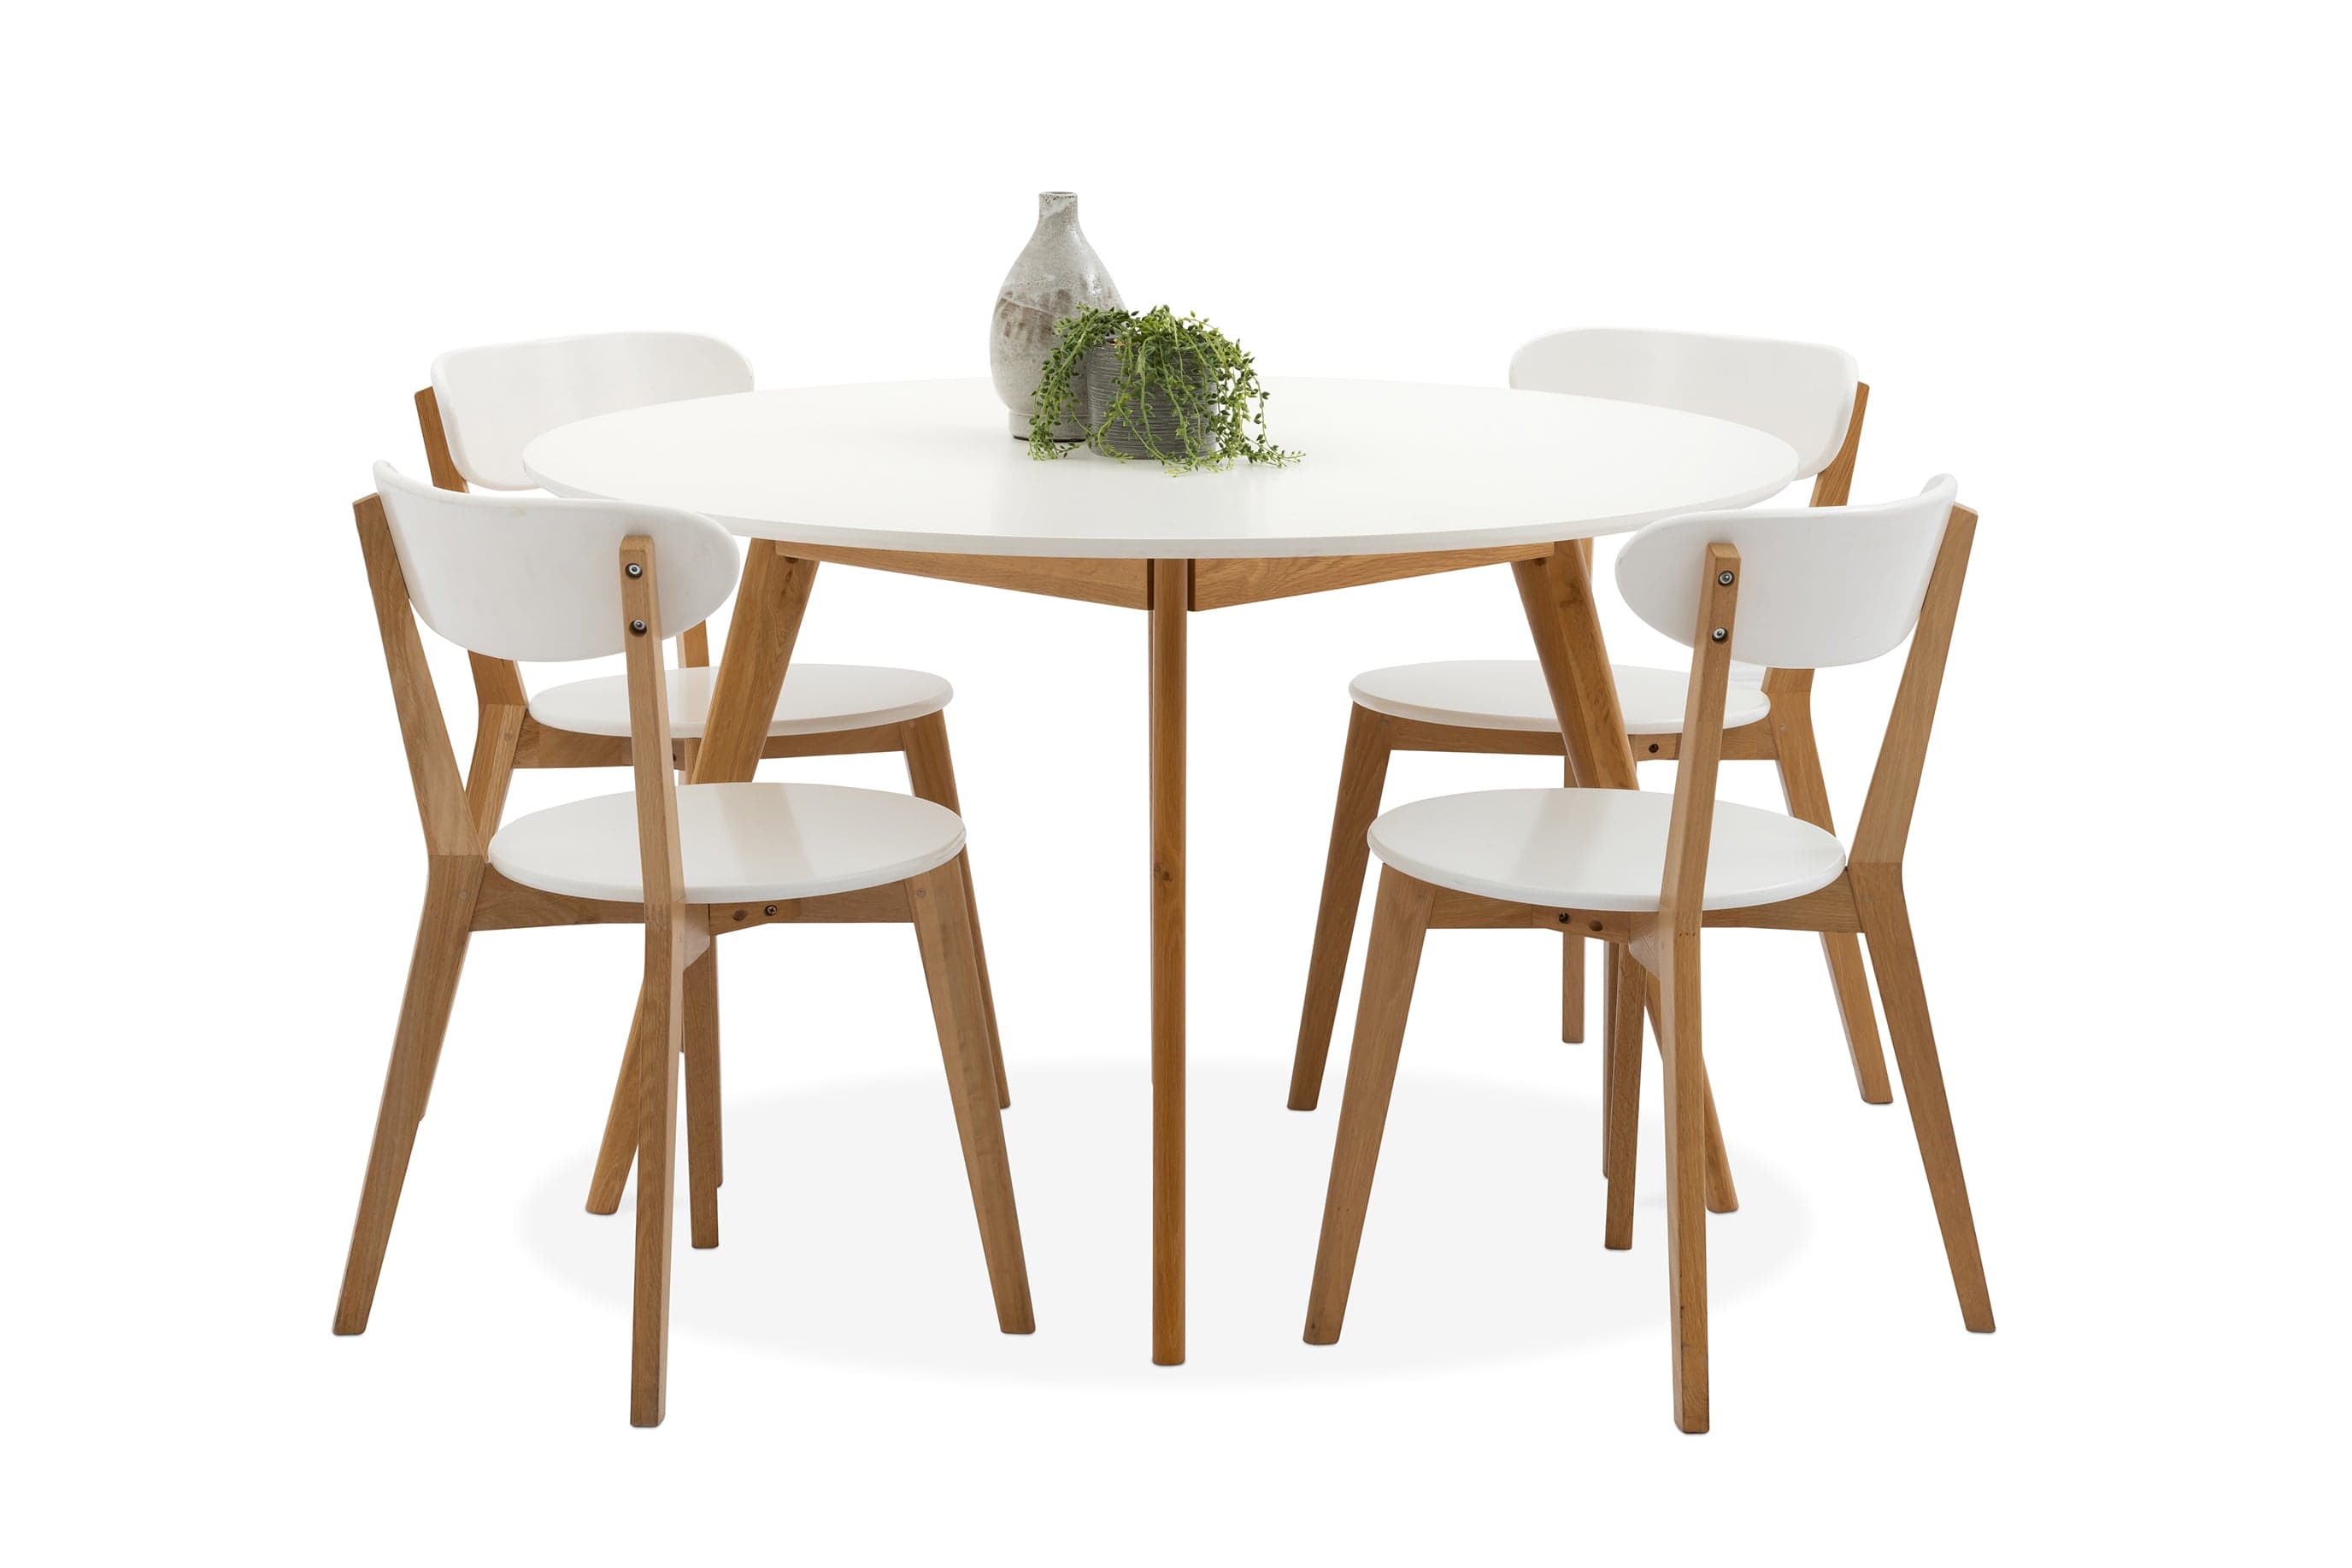 Norway 5 Piece Dining Suite with a Stylish Scandinavian Oak and White Finish